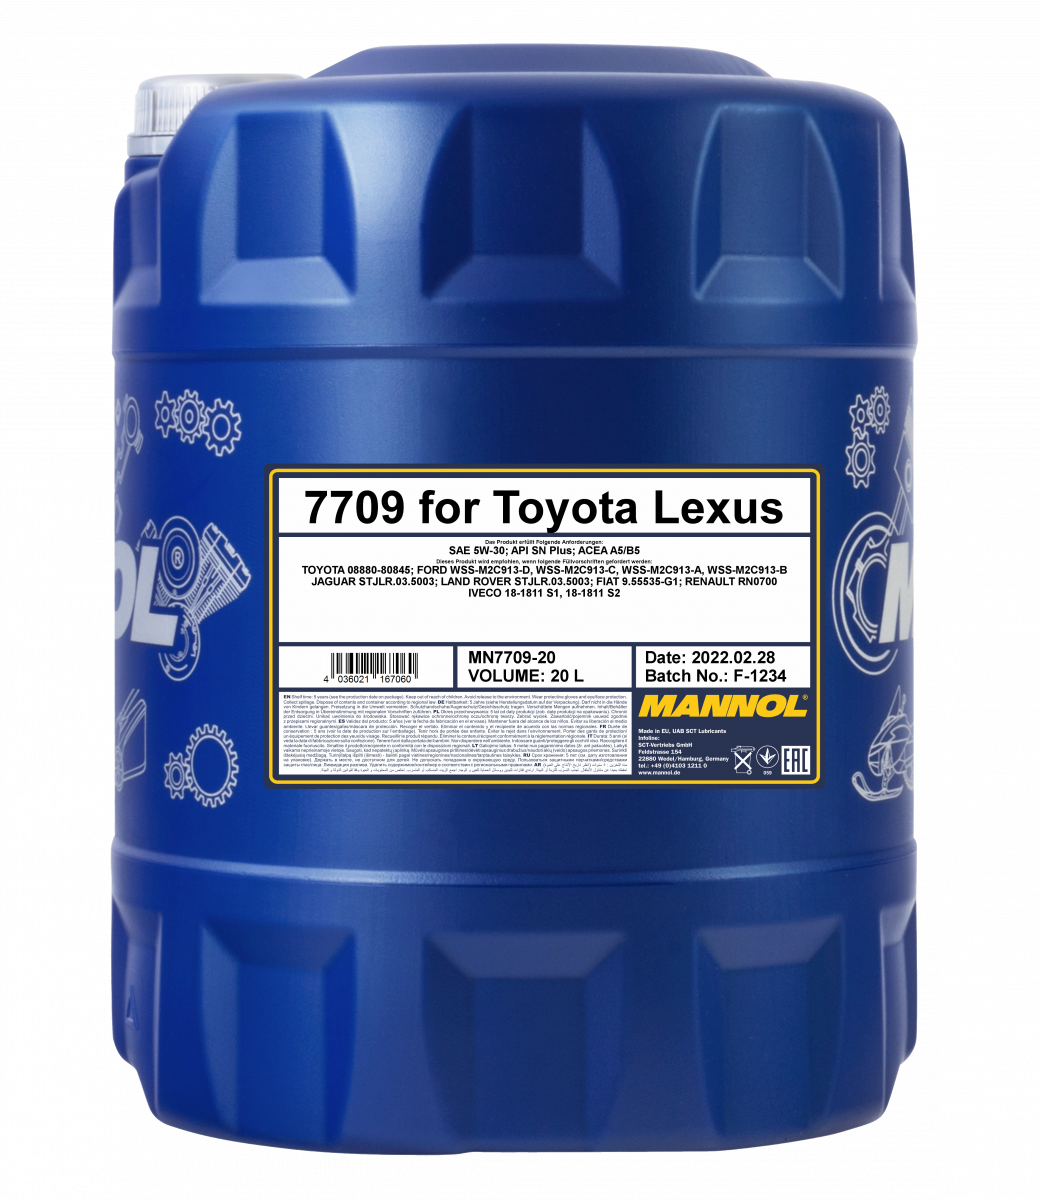 Mannol Full Synthetic Engine Oil 5W-30 for modern Toyota & Lexus- MN7709  (1L)